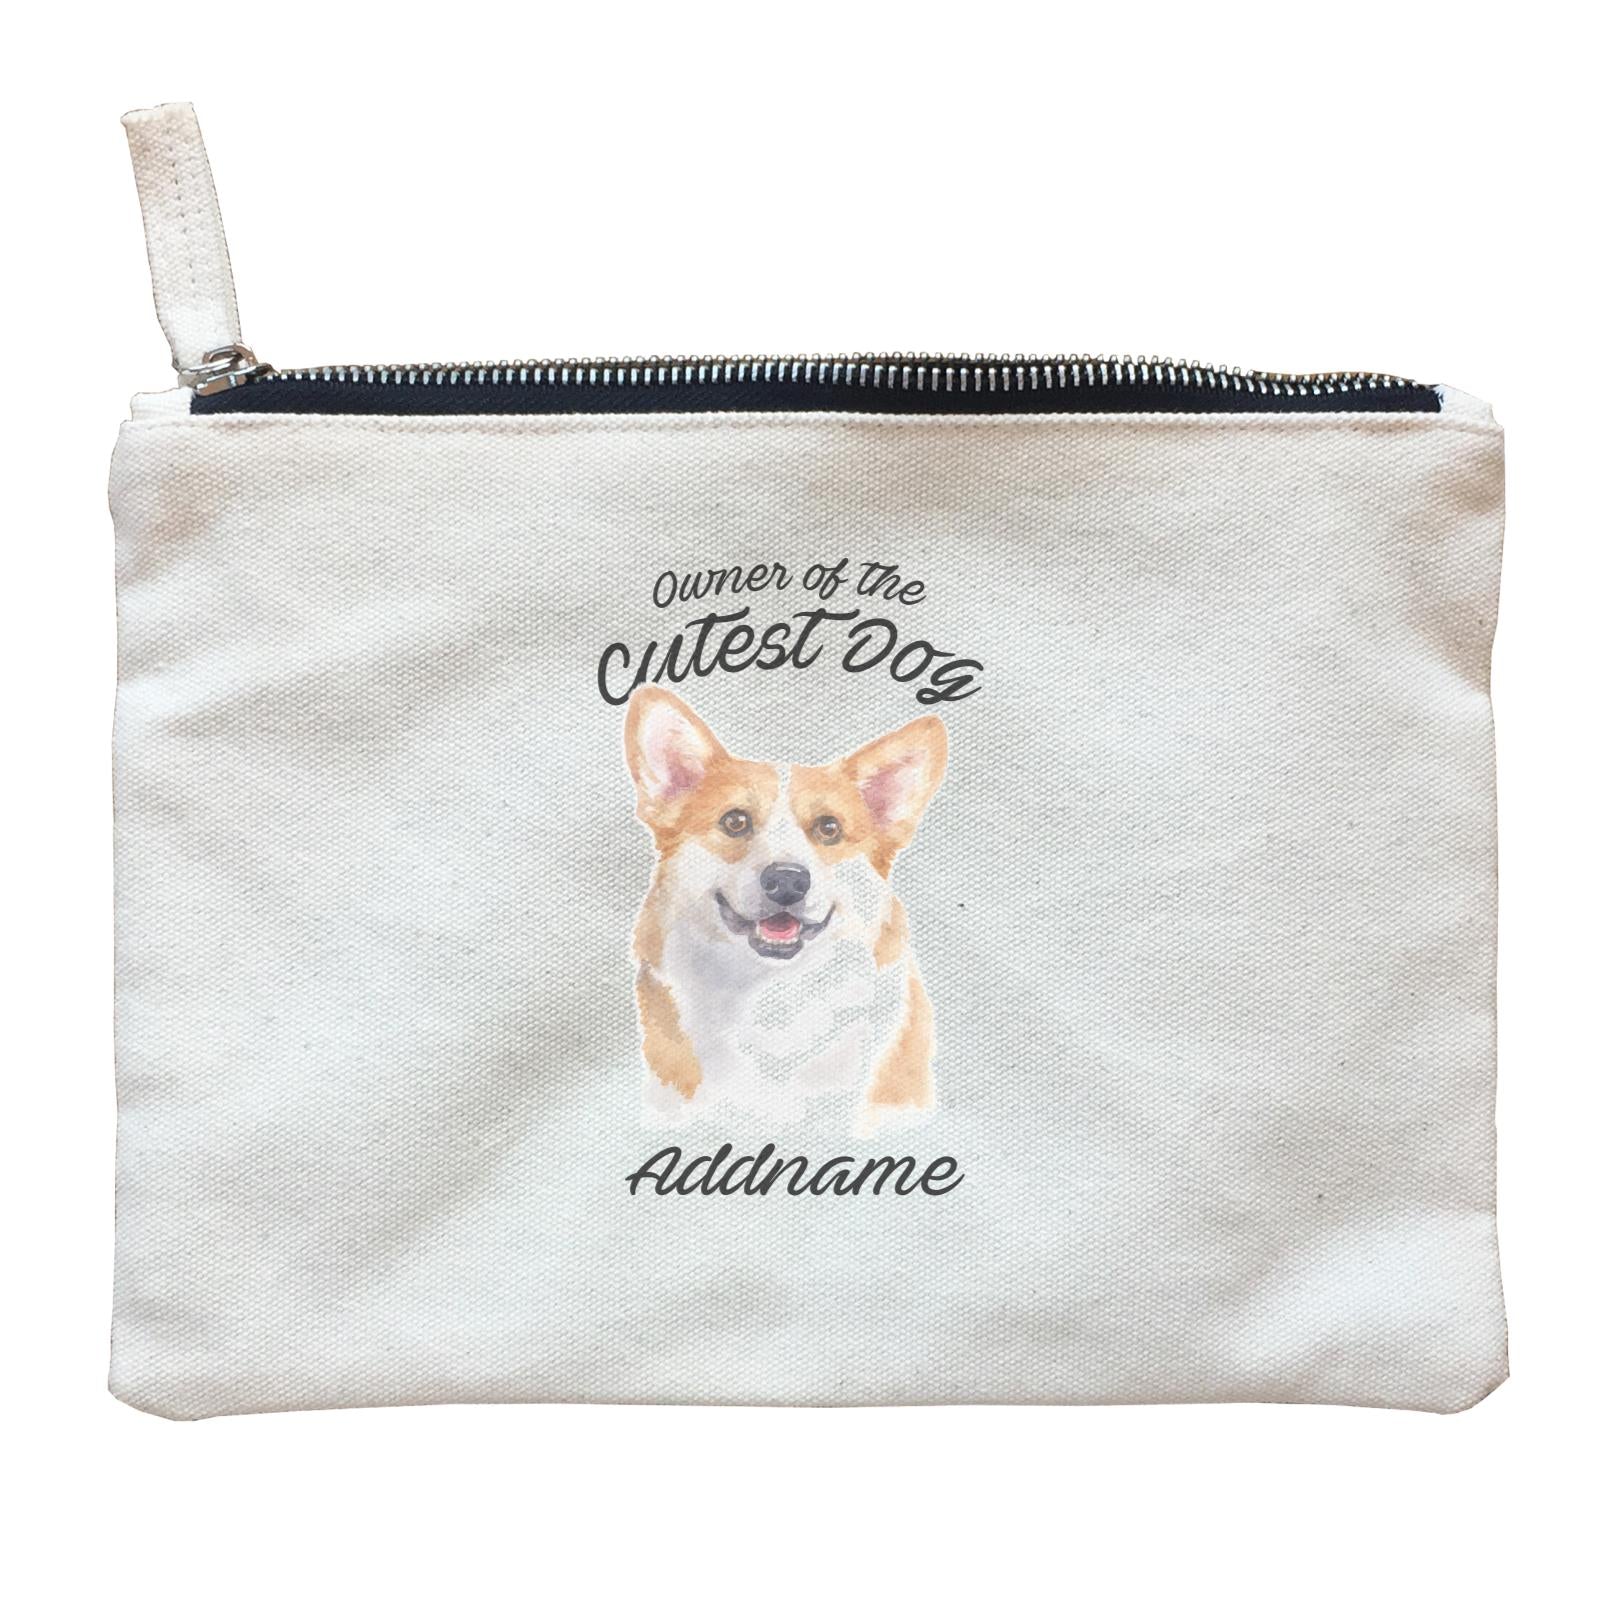 Watercolor Dog Owner Of The Cutest Dog Welsh Corgi Smile Addname Zipper Pouch